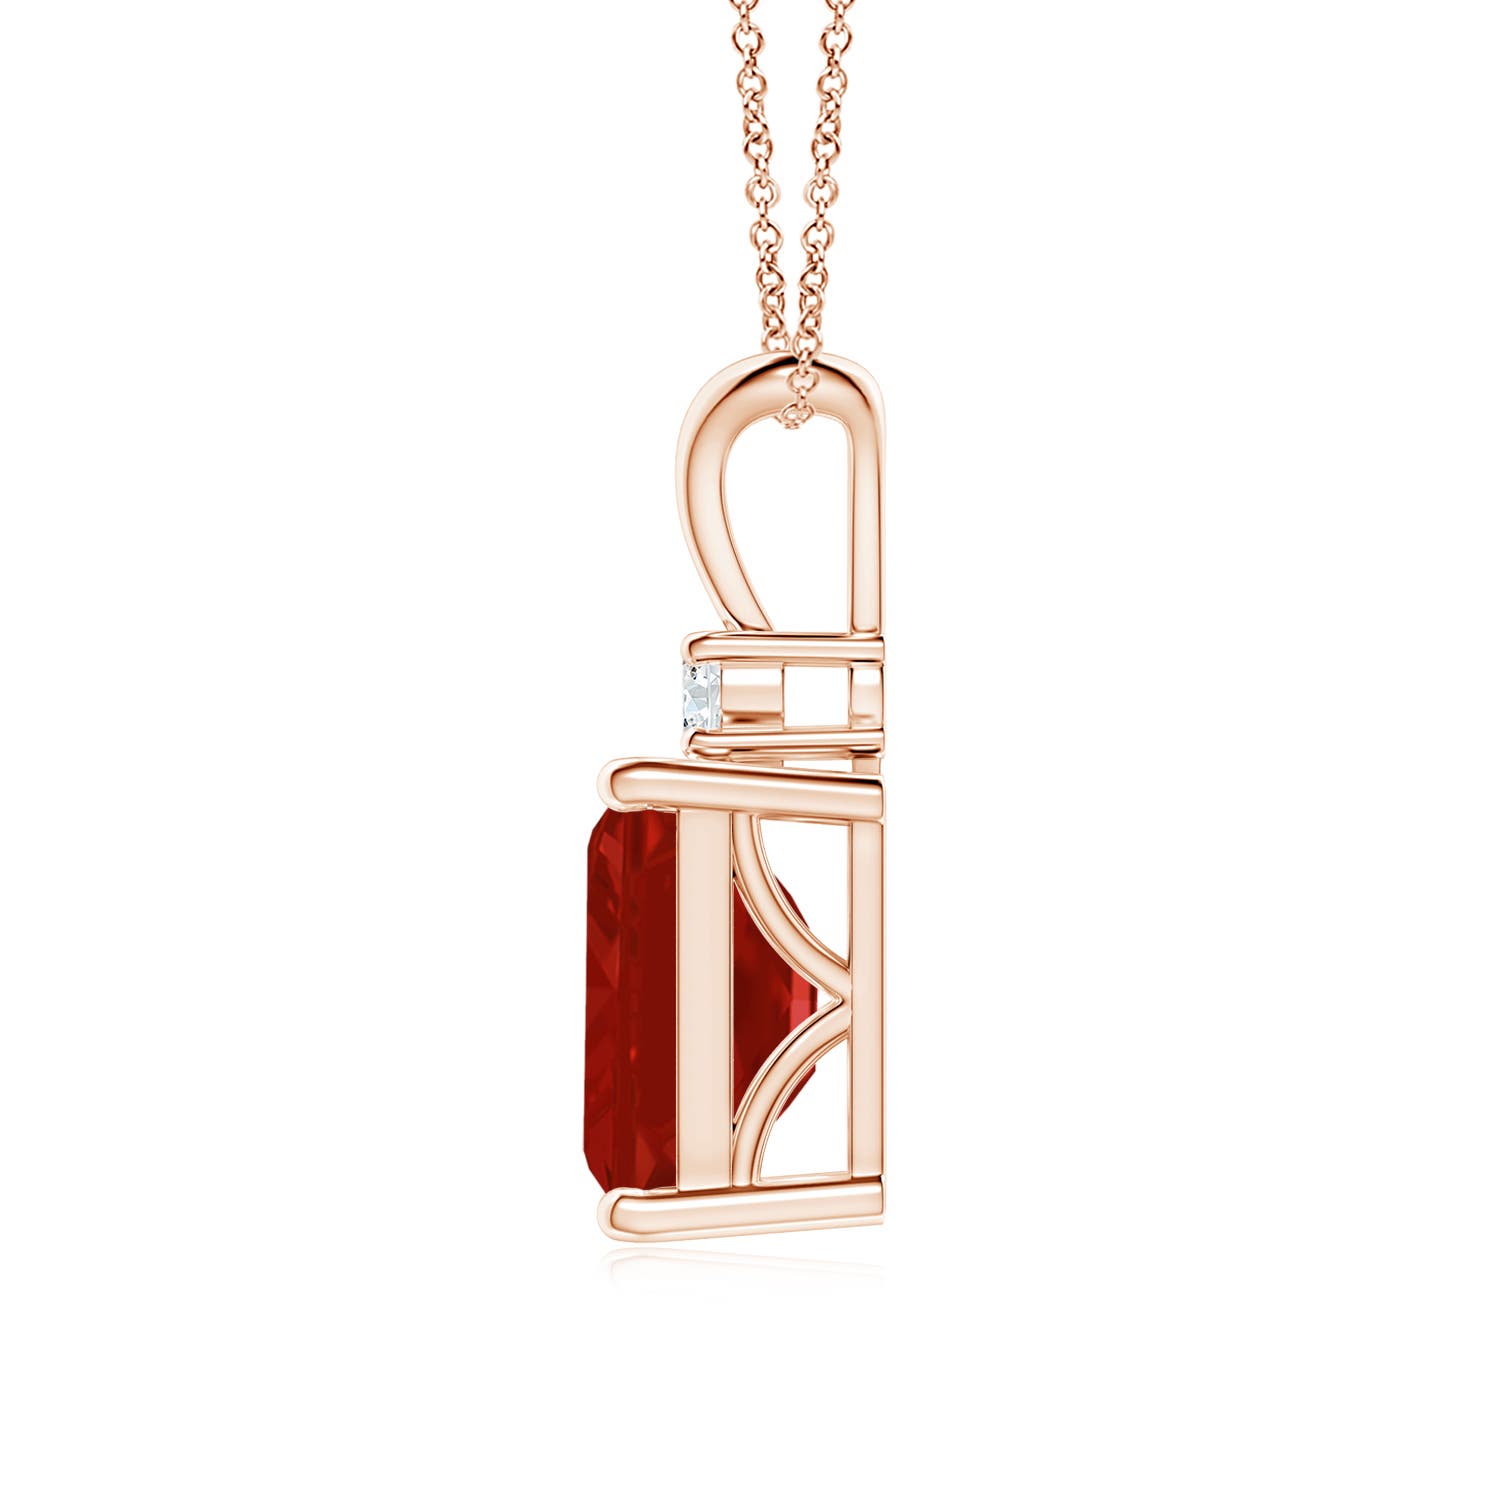 AA - Ruby / 3.07 CT / 14 KT Rose Gold